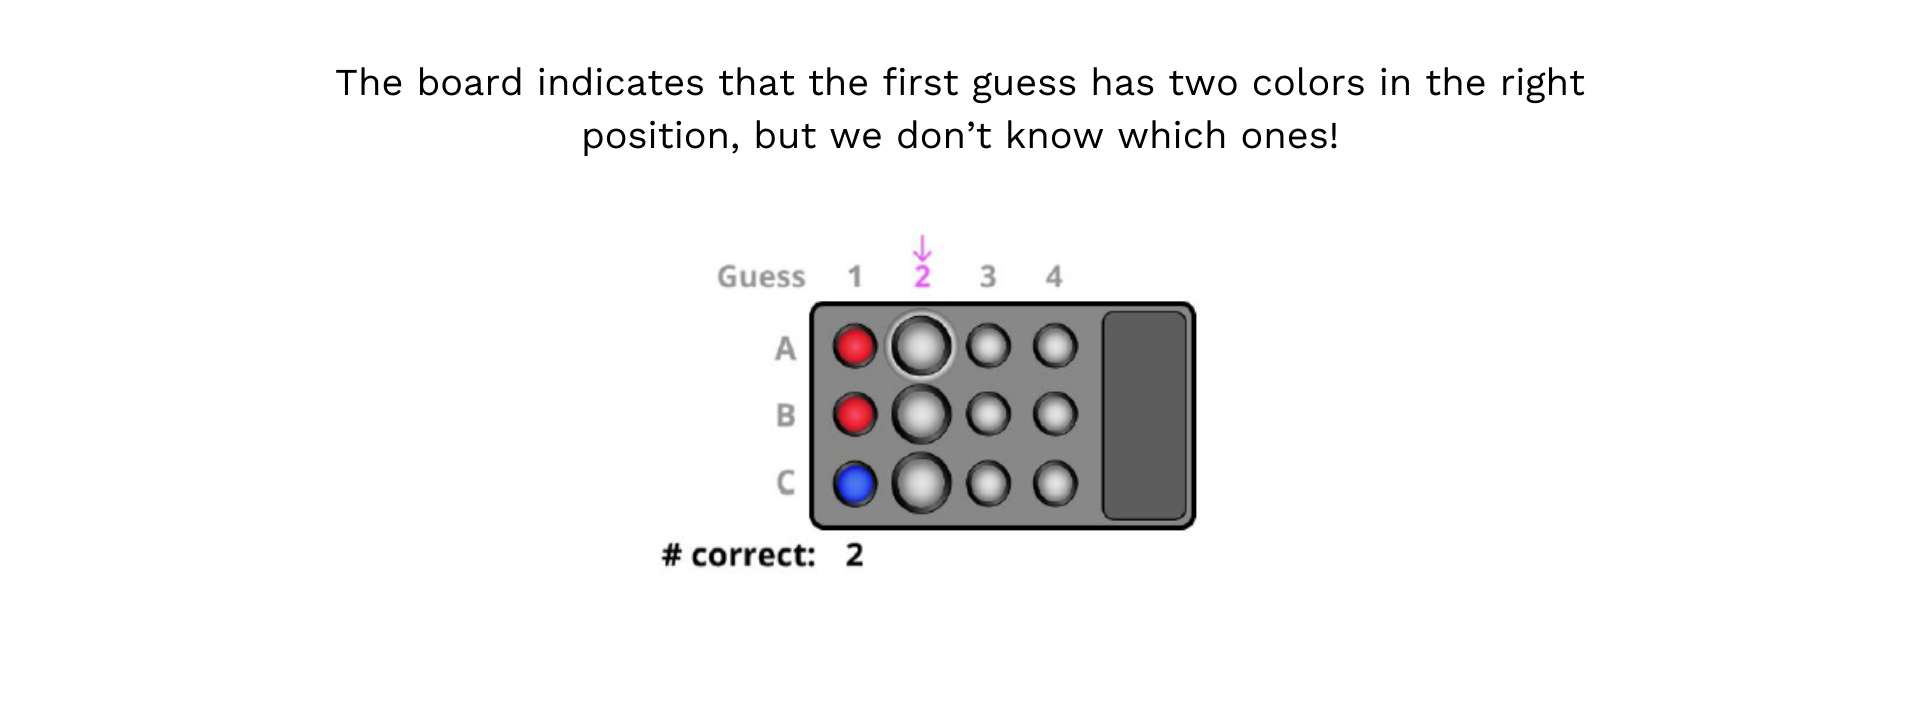 The board indicates that the first guess has two colors in the right position, but we don’t know which ones!